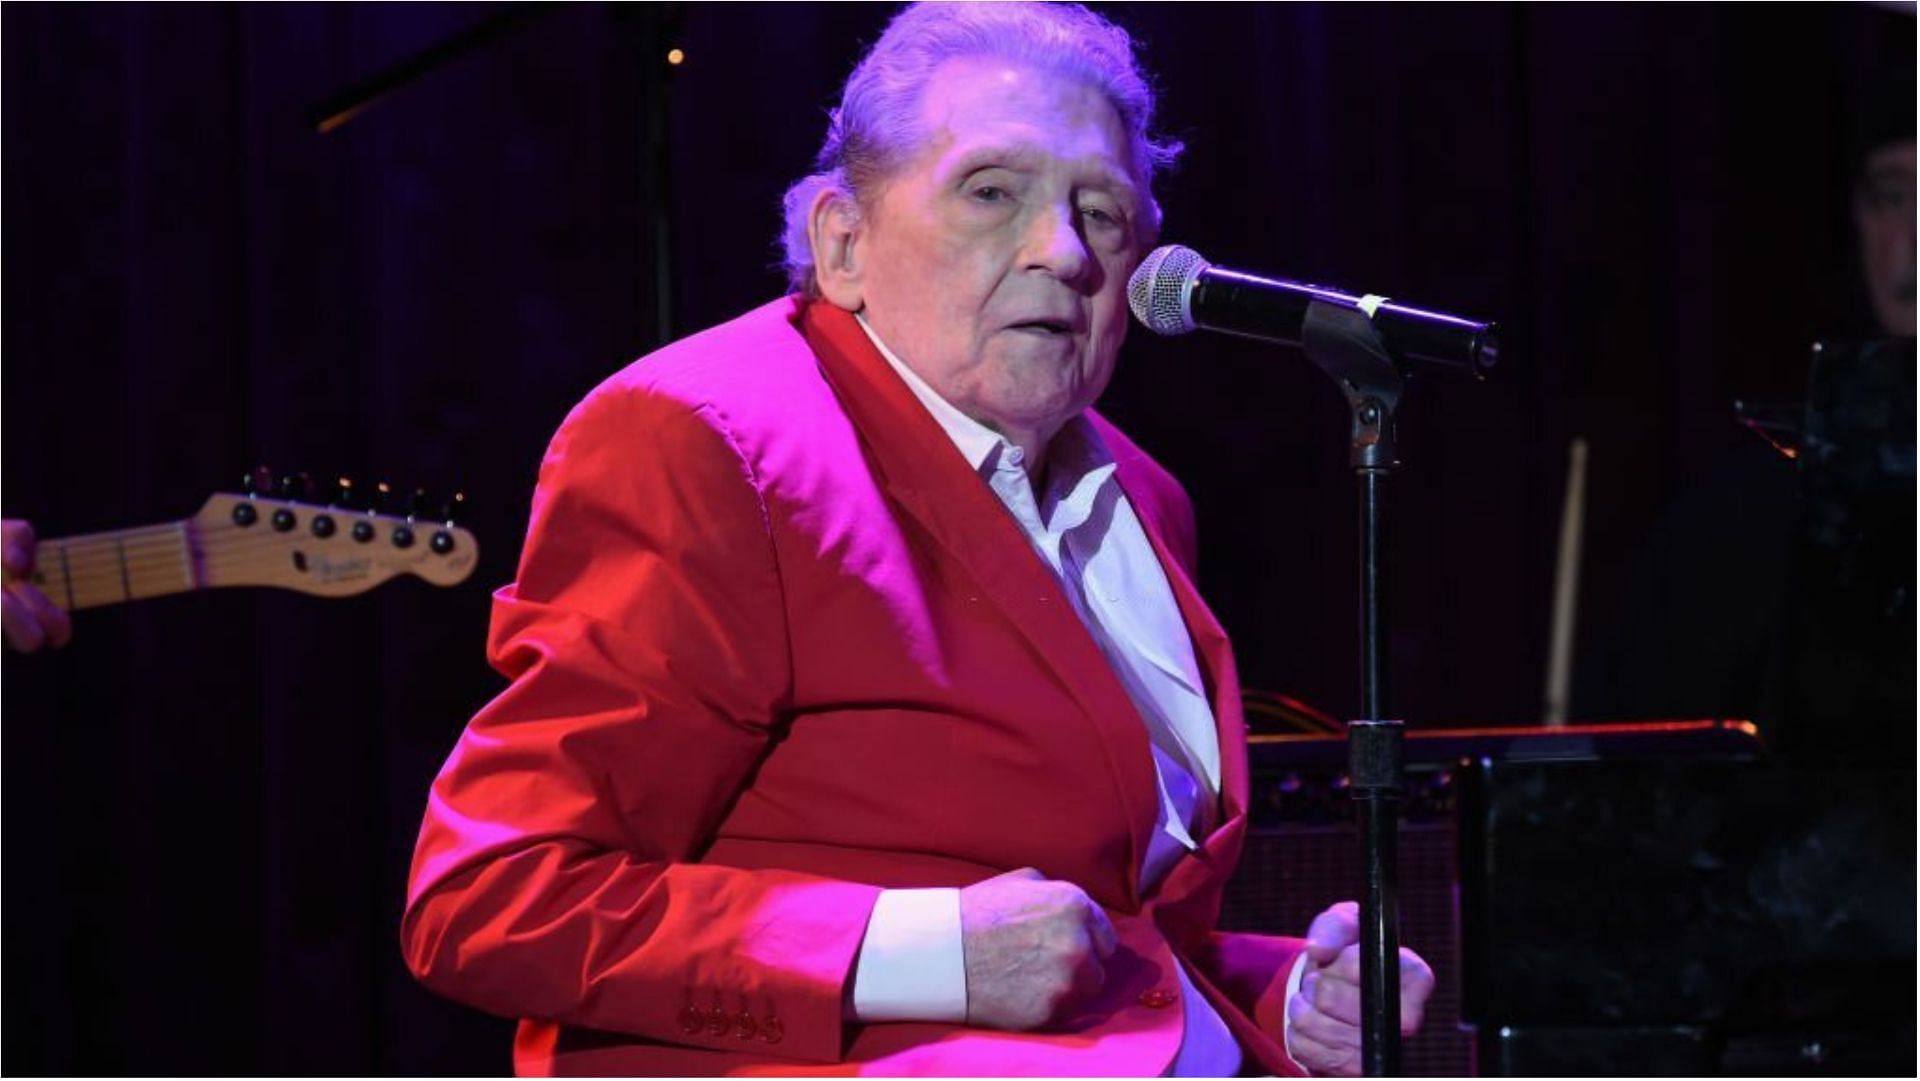 Jerry Lee Lewis died of natural causes at the age of 87 (Image via Gary Gershoff/Getty Images)